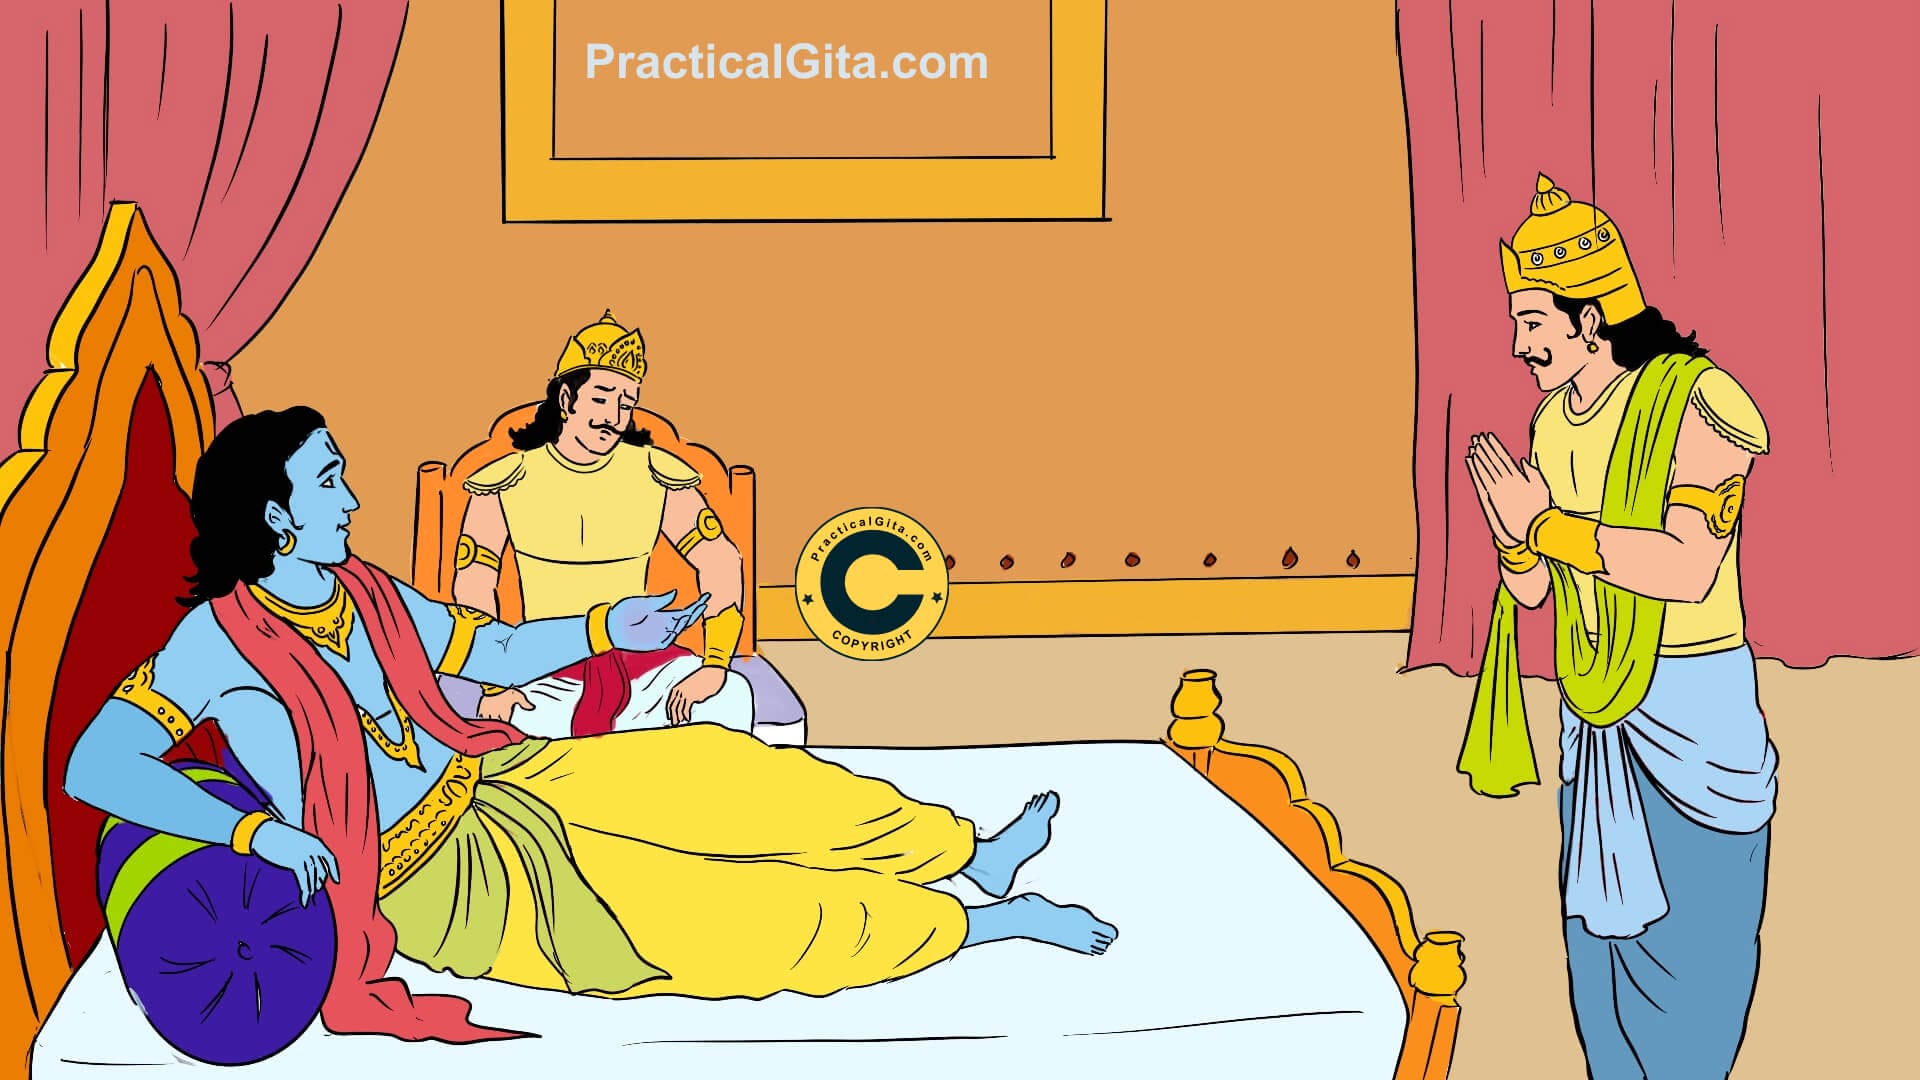 How to Make Wise Choices in Life: Let's Learn From Gita